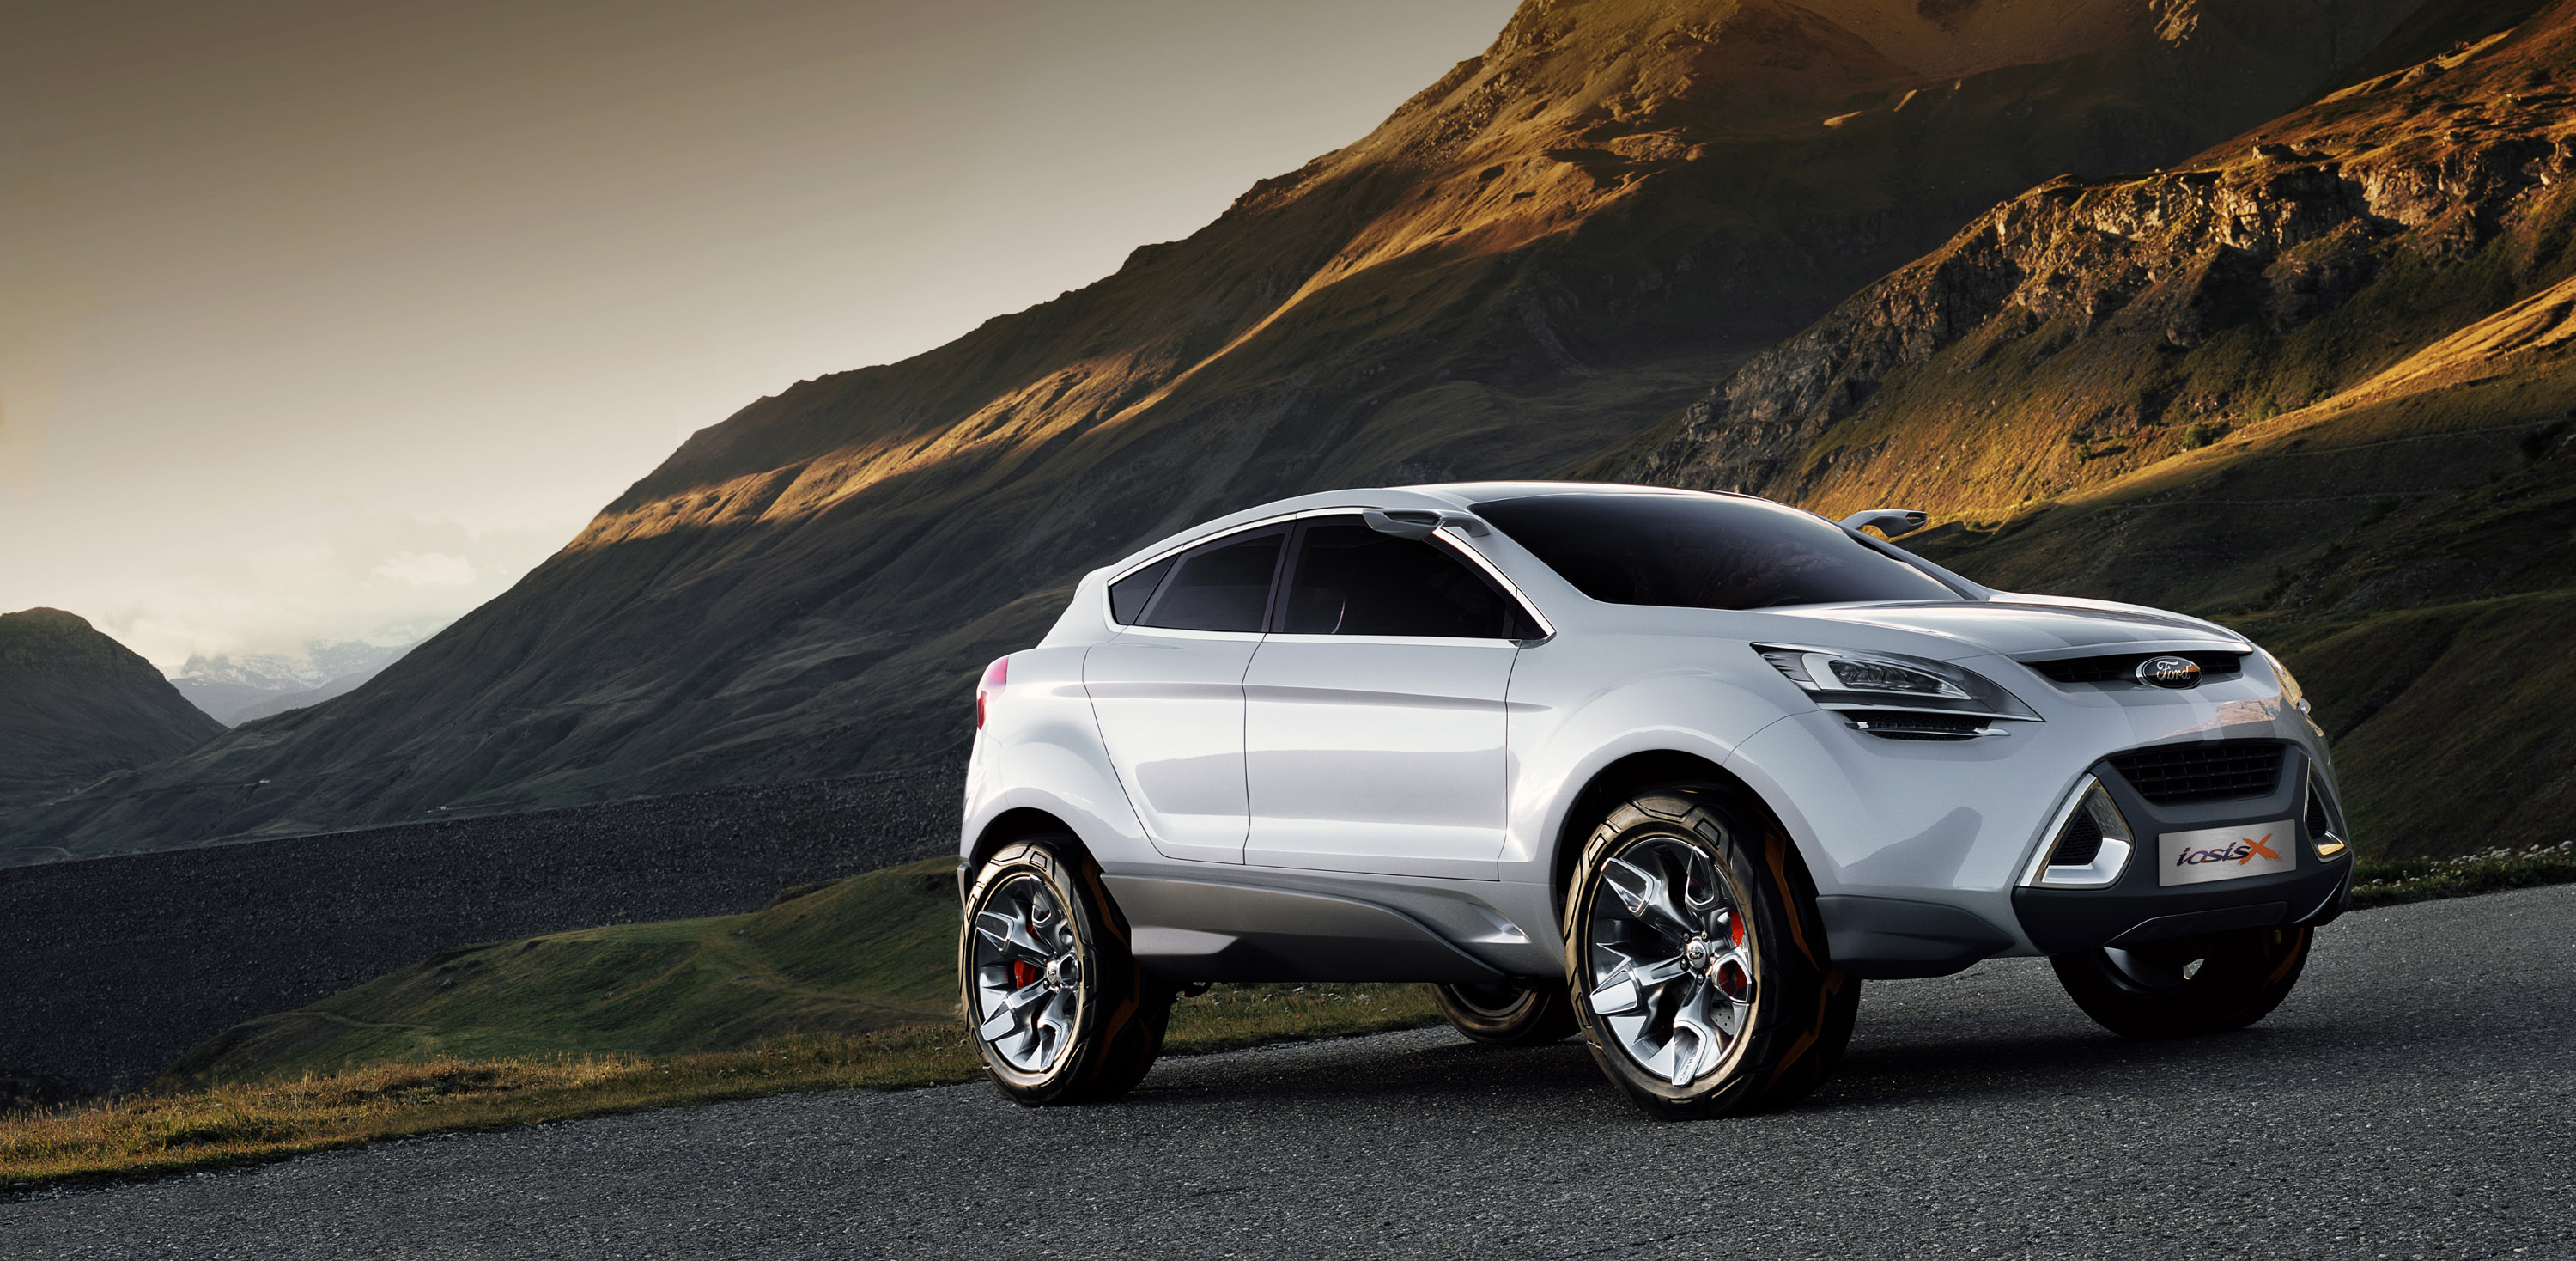 Ford iosis X Concept photo #1